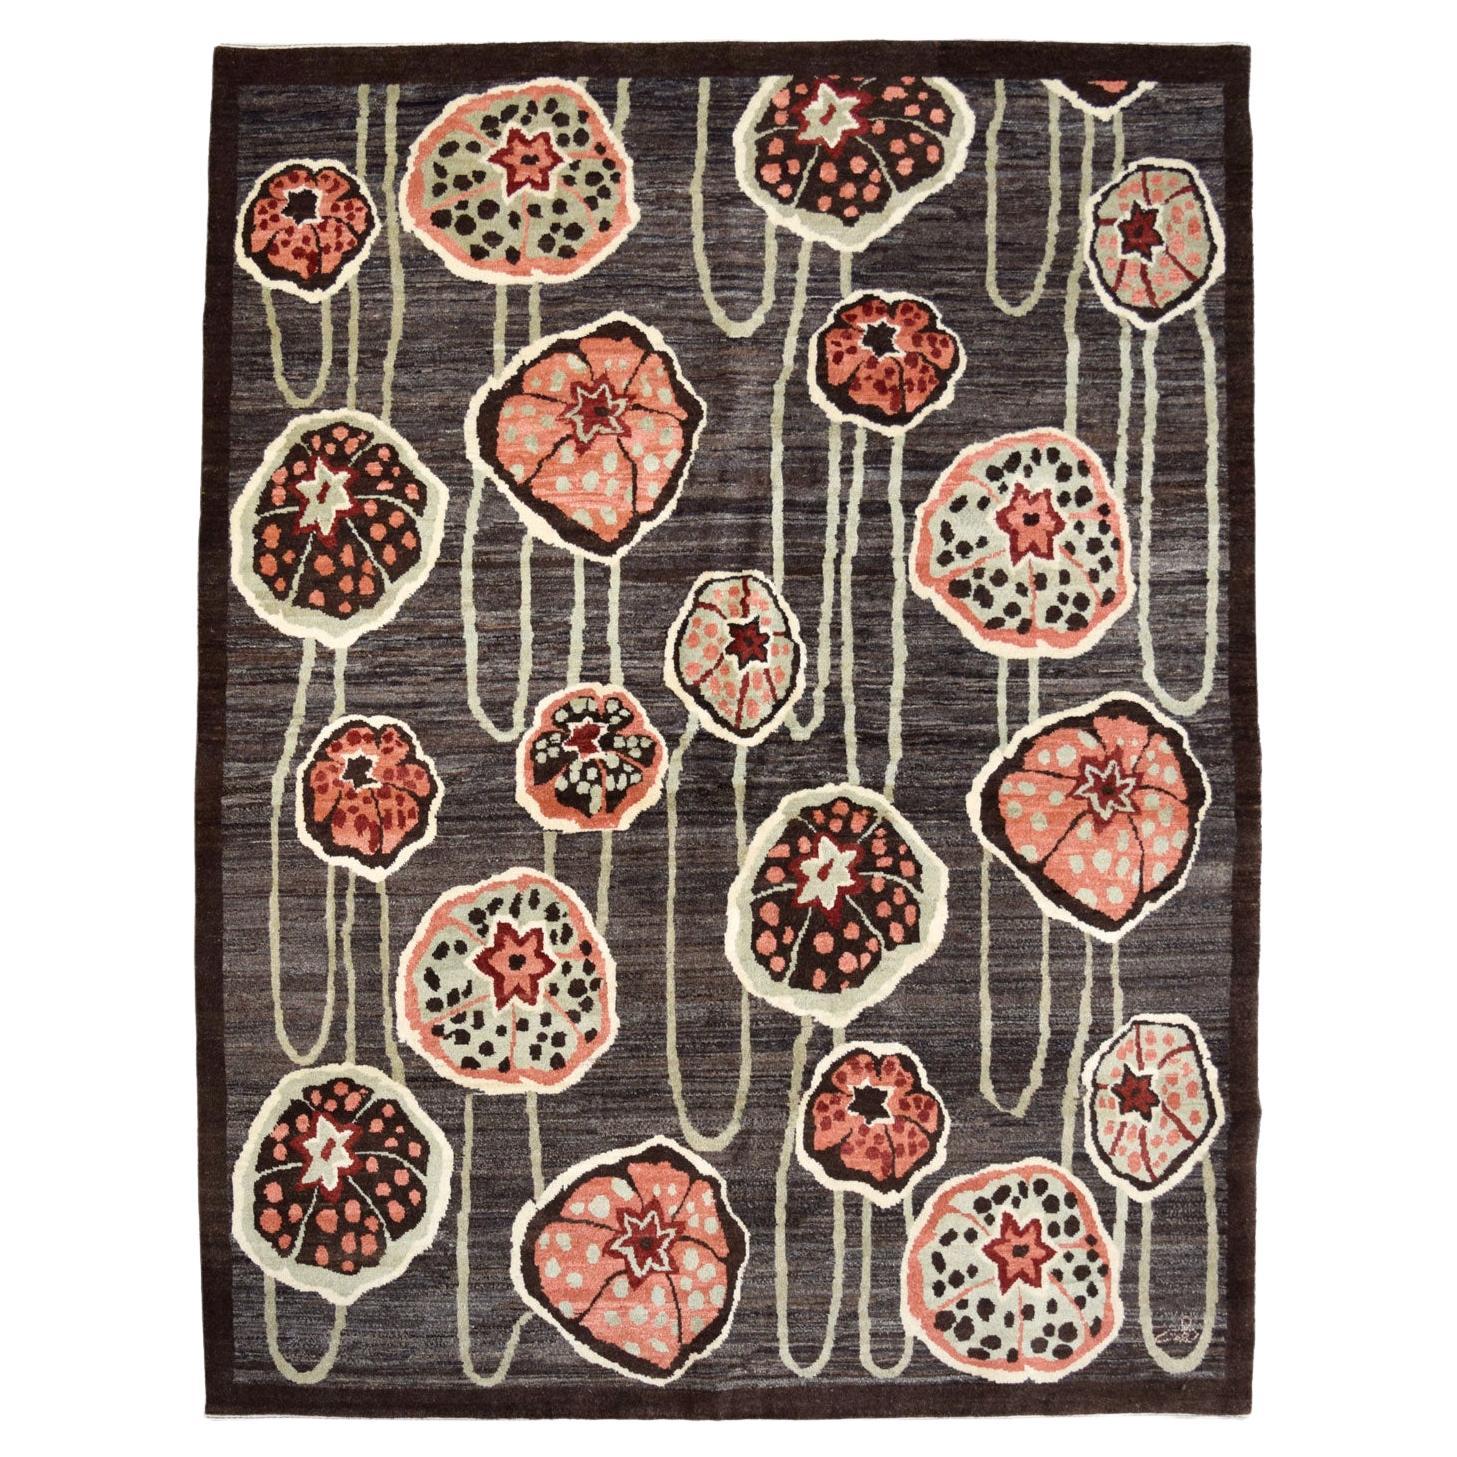 Orley Shabahang "Jellyfish" Art Deco Persian Rug, Cream, Pink and Brown, 5’ x 7’ For Sale